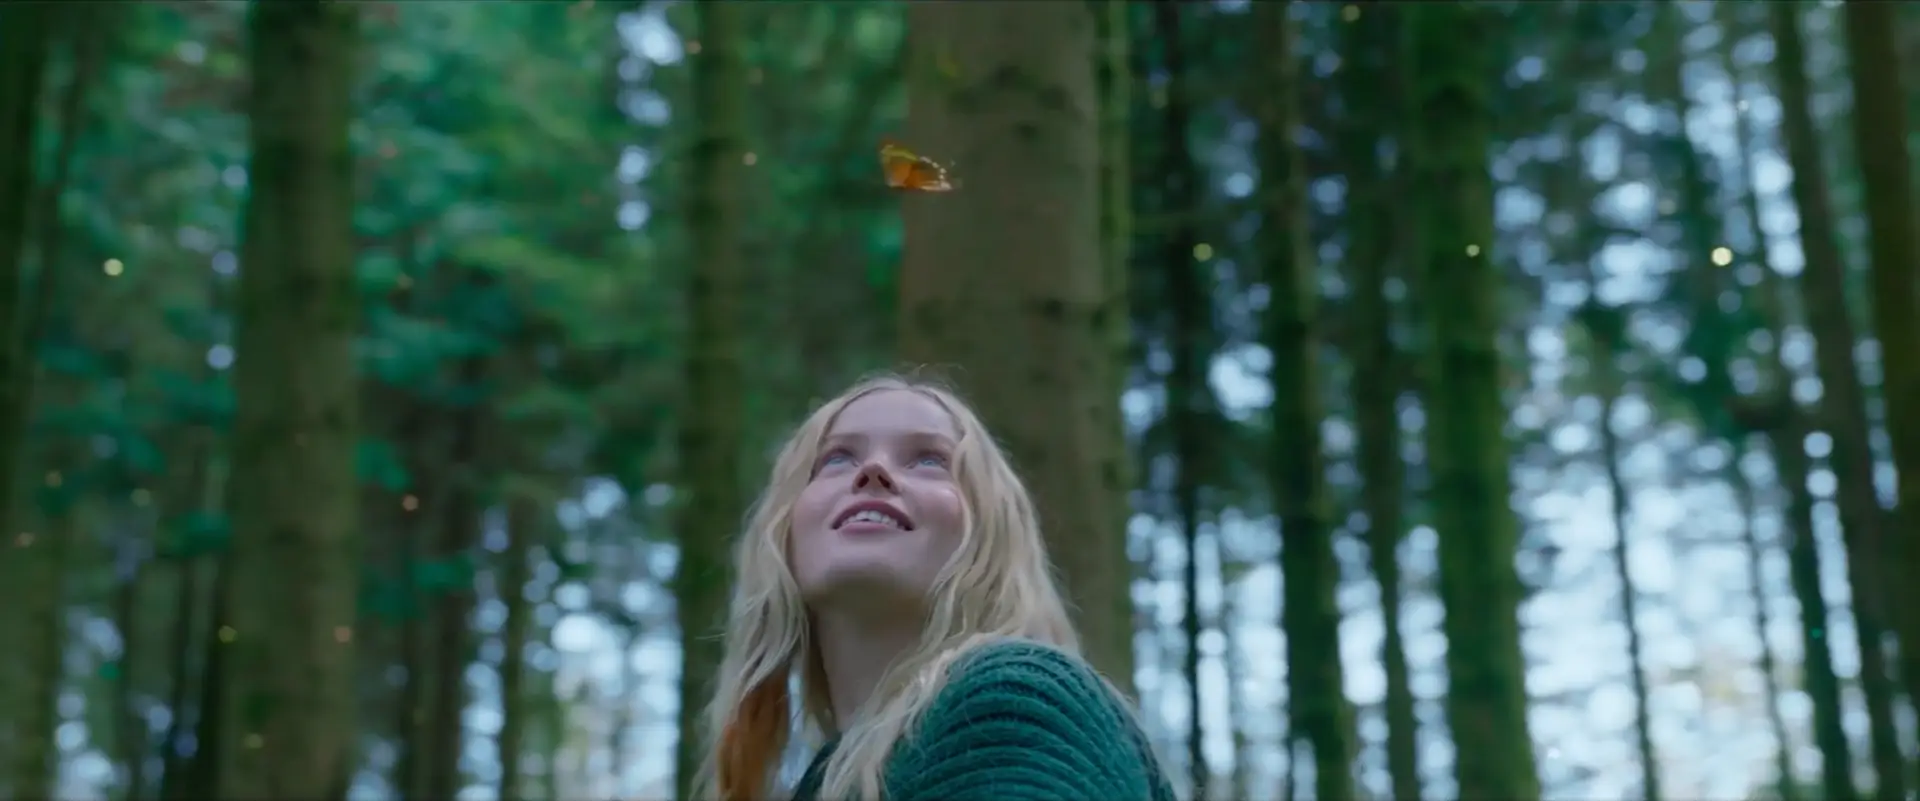 A girl is standing in a forest with a butterfly flying in the air, in December.